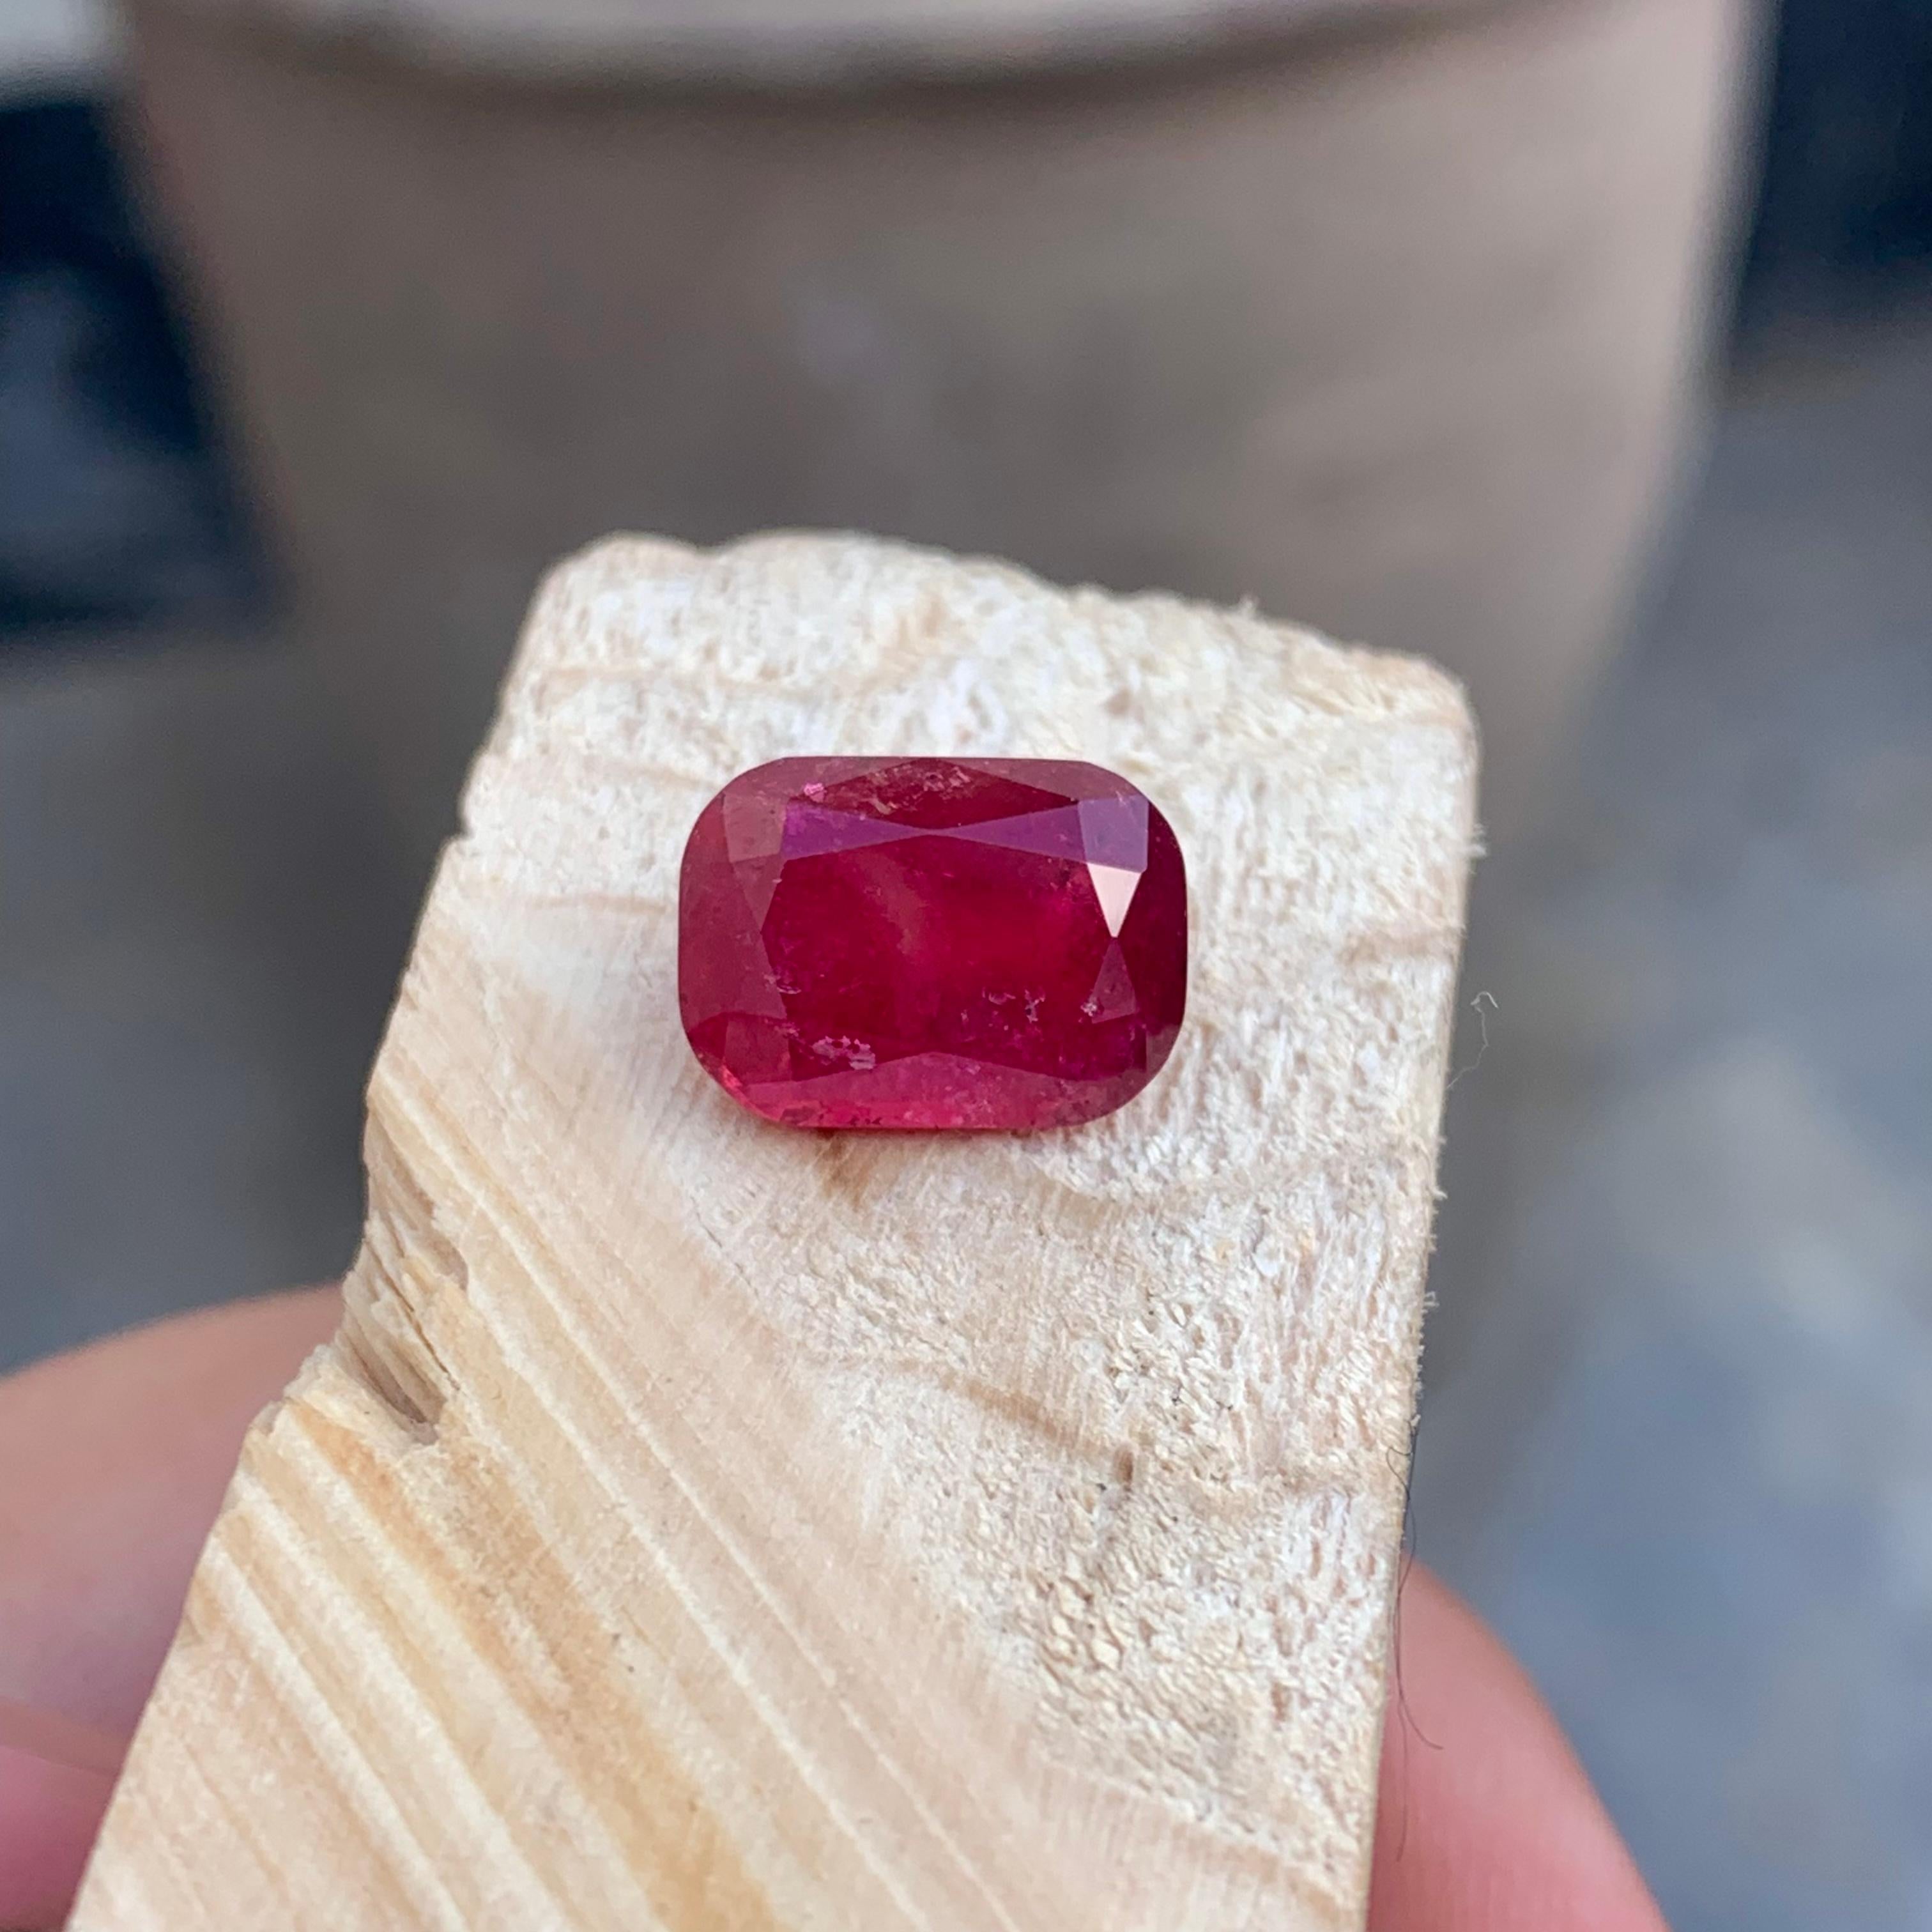 Gorgeous Rich Color Loose Included Rubellite Tourmaline 5.50 Carat Cushion Shape For Sale 6